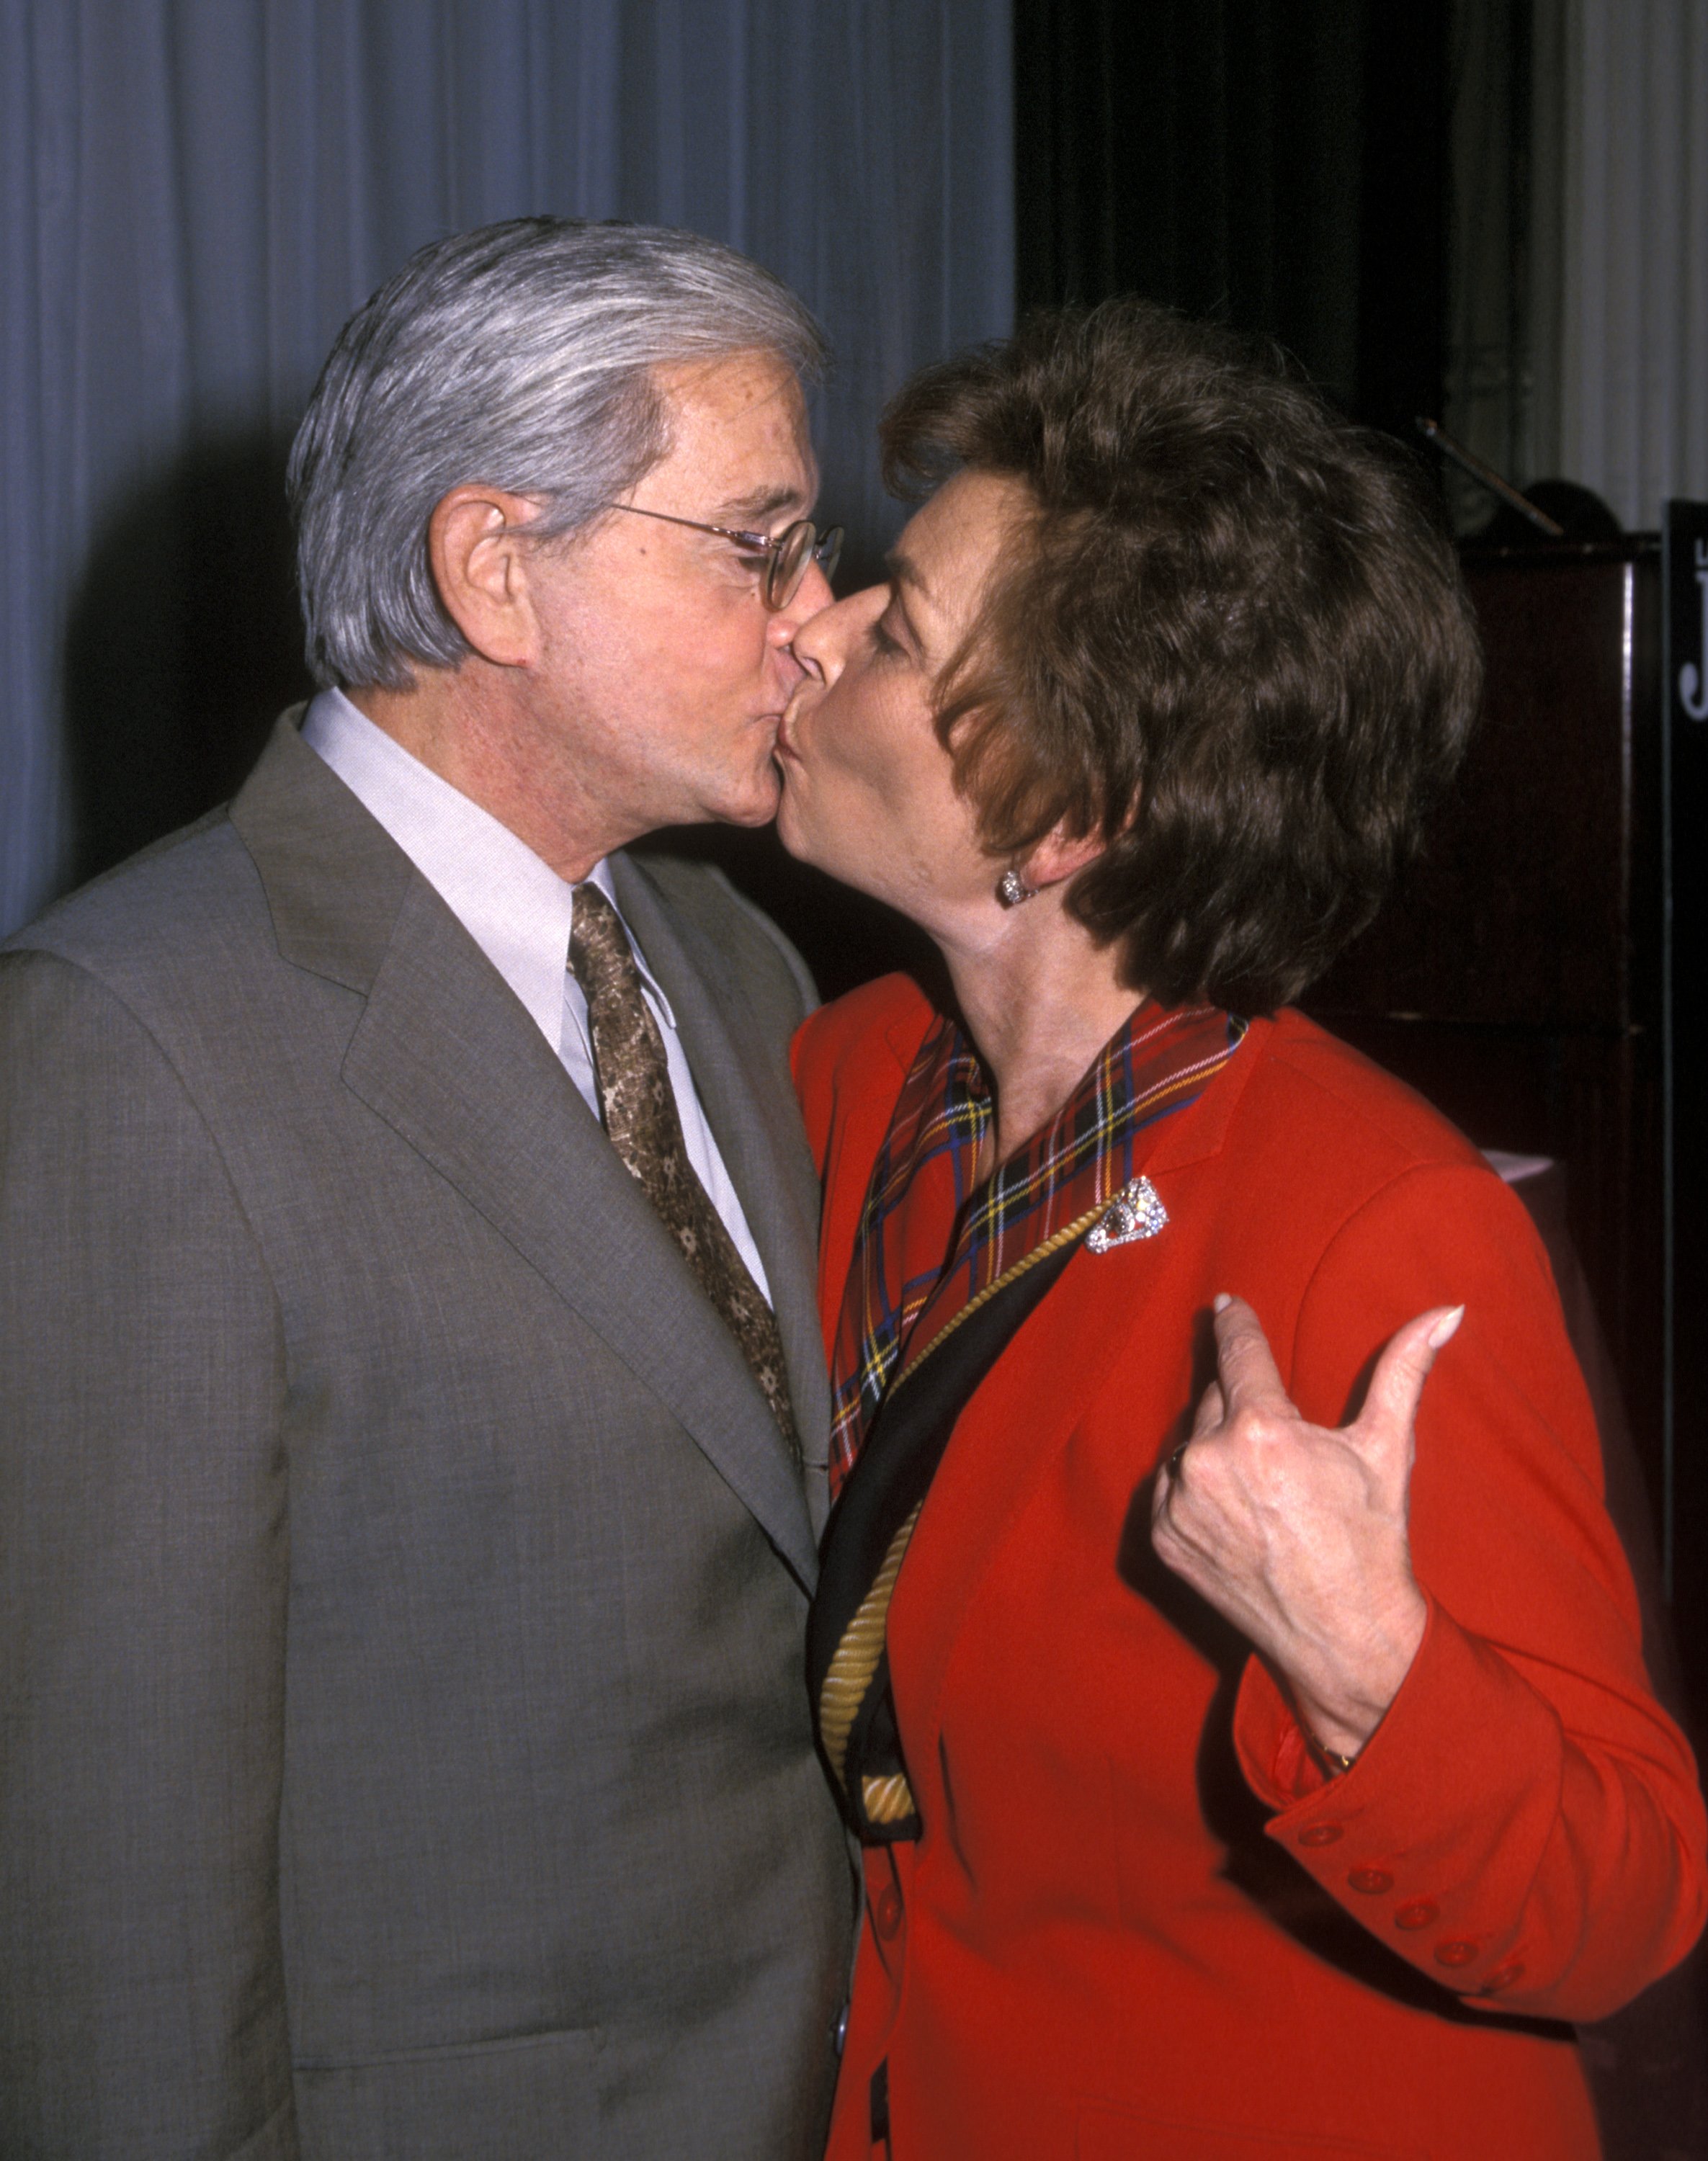 Jerry Sheindlin and Judy Sheindlin attend Ladies' Home Journal "One Smart Lady Award" on February 23, 2000 at the Waldorf Astoria Hotel in New York City. | Source: Getty Images